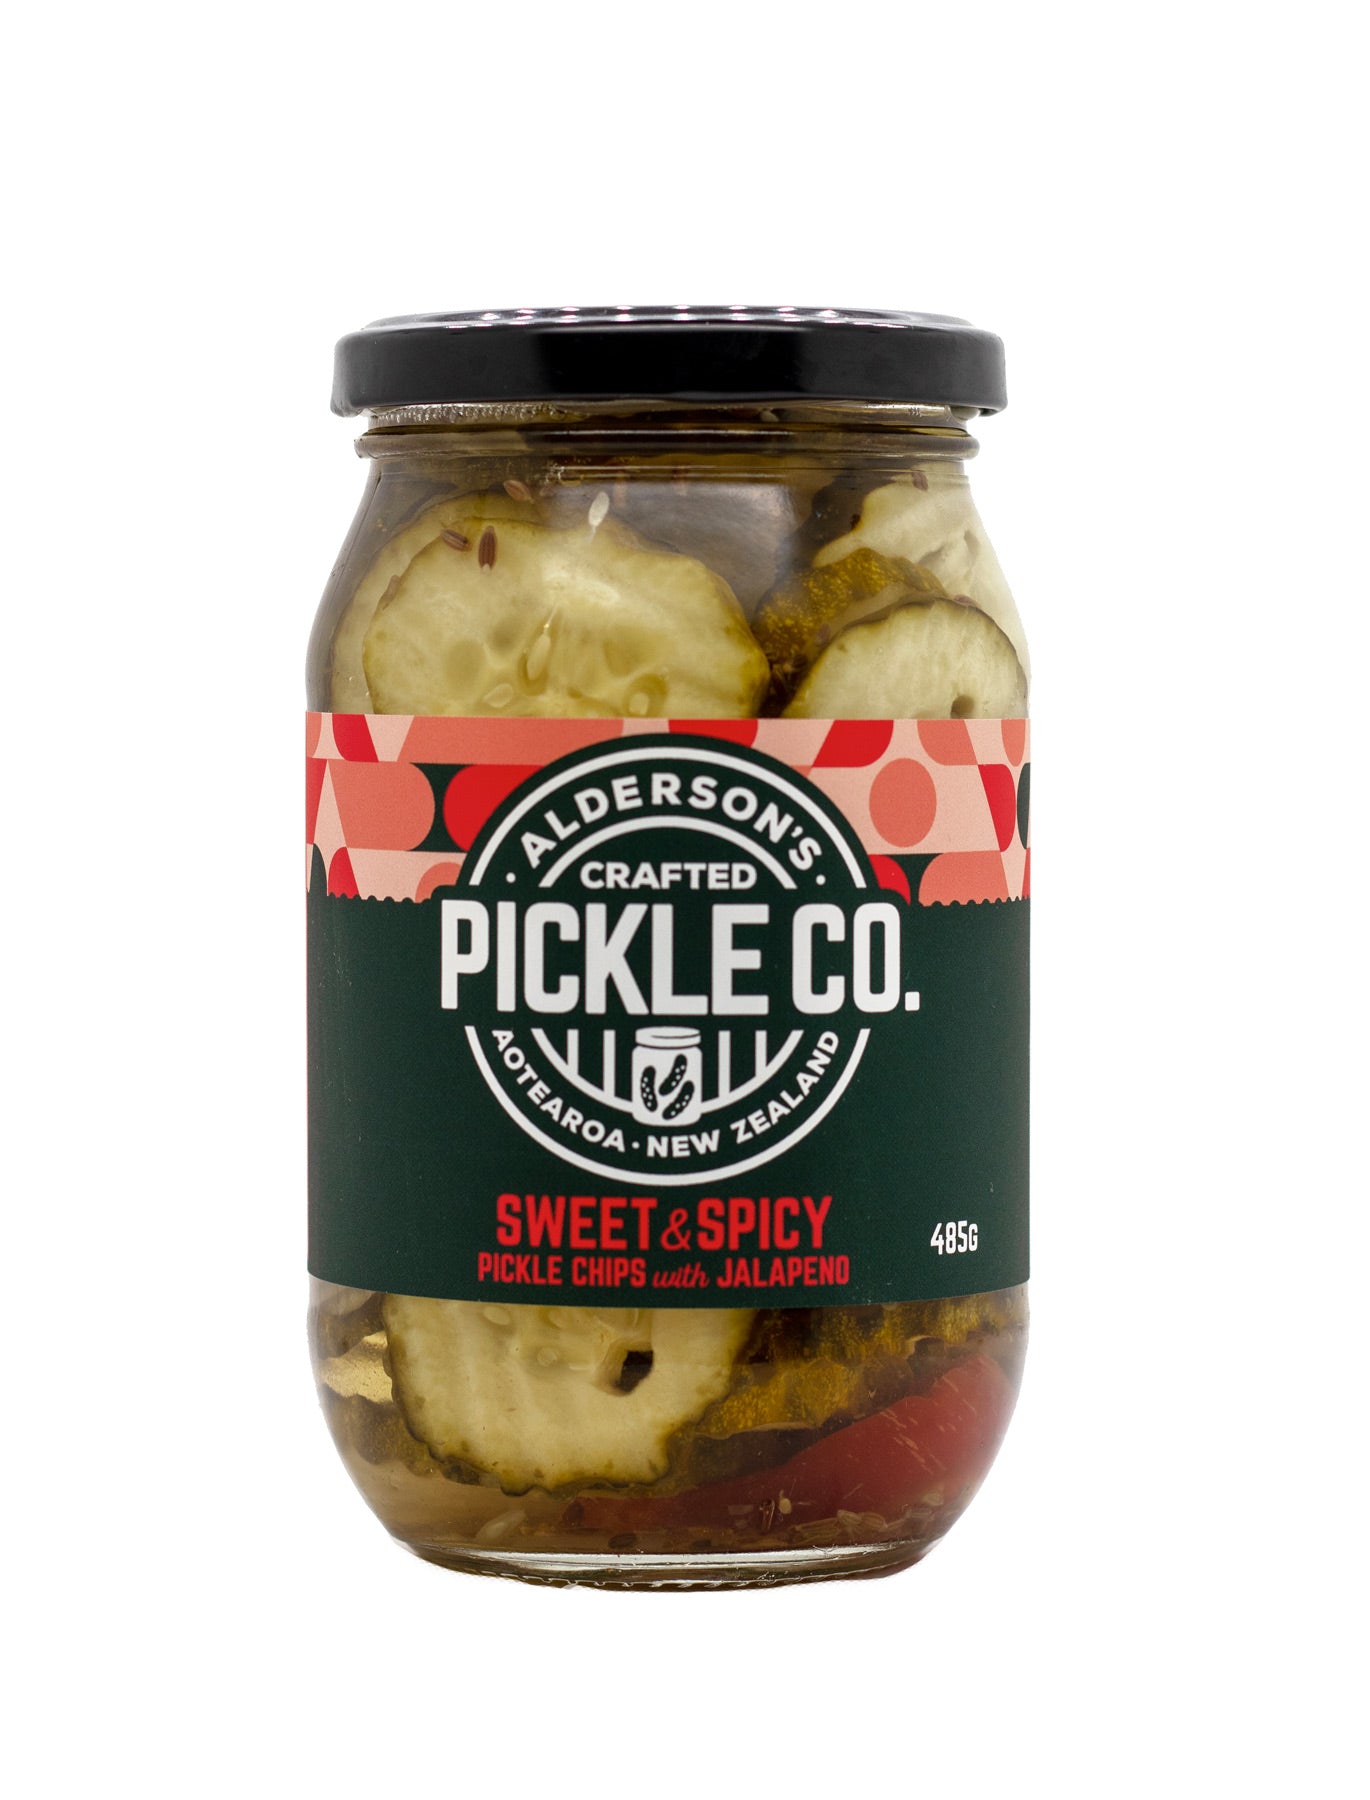 Sweet & Spicy Jalapeño Pickle Chips